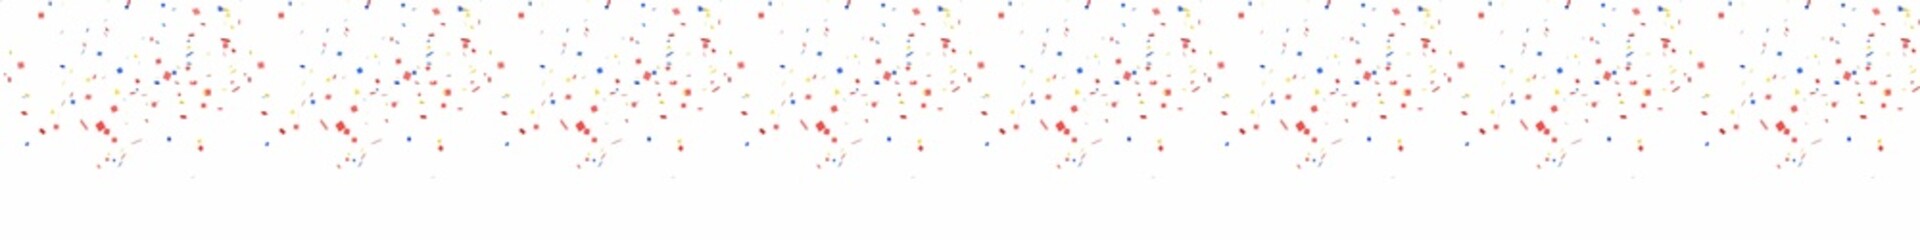 An illustration of colourful confetti rain on long horizontal white isolated background